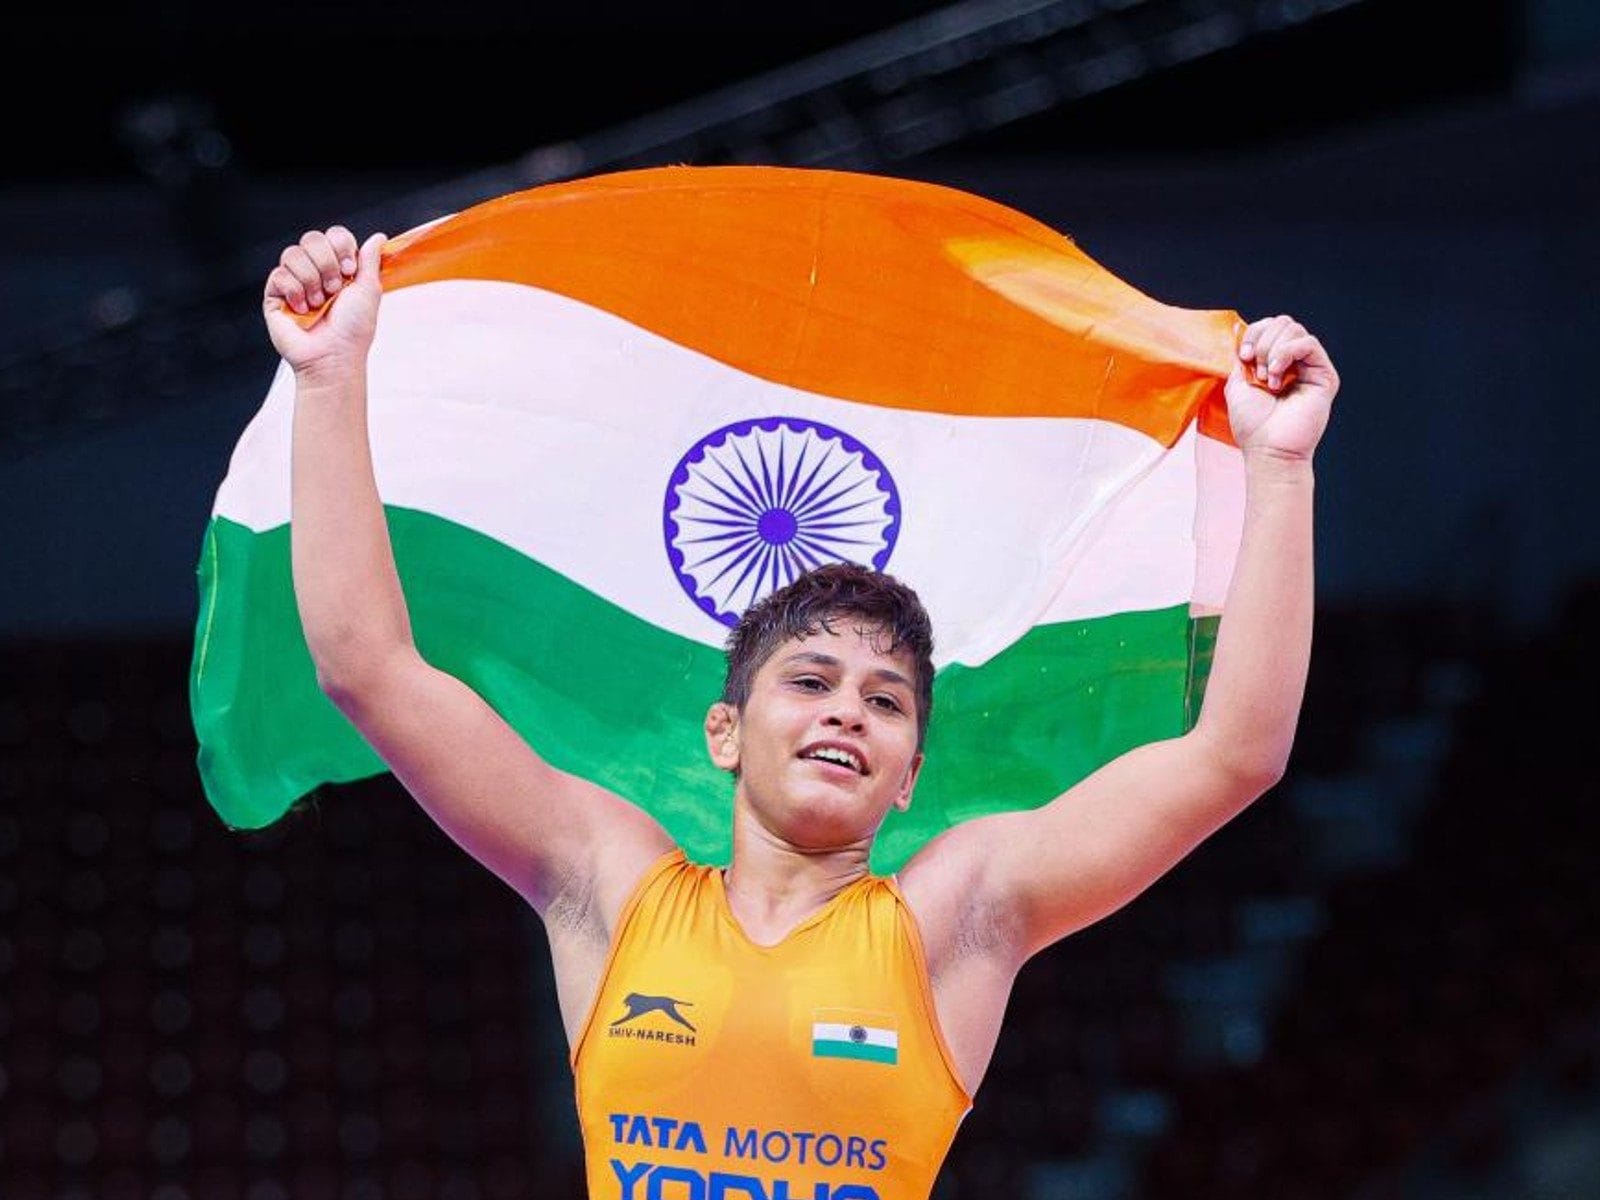 Telugu First Bright Xxx Videos - 17-Year-Old Antim Becomes First Indian Girl to Win World Junior Wrestling  Gold - News18